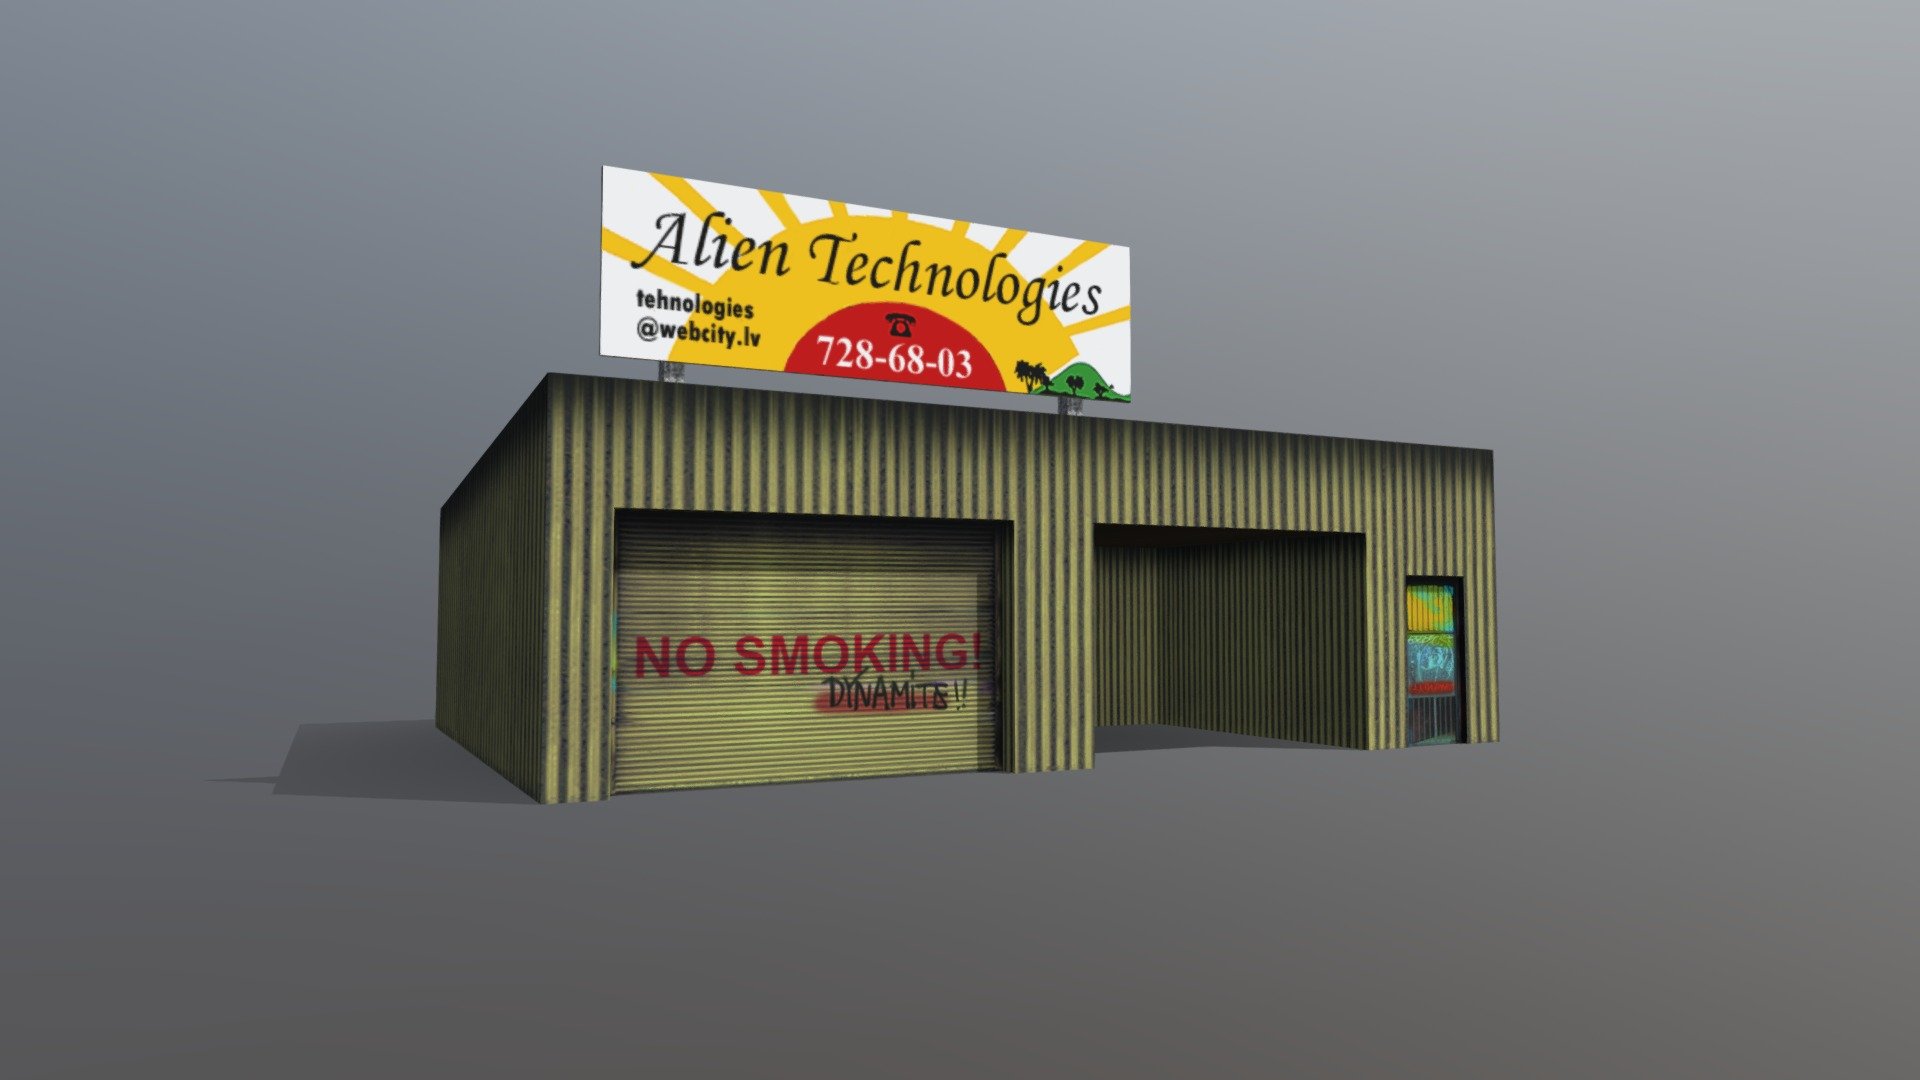 Low-poly service station. Texture size 1024x1024. Game engine ready 3d model